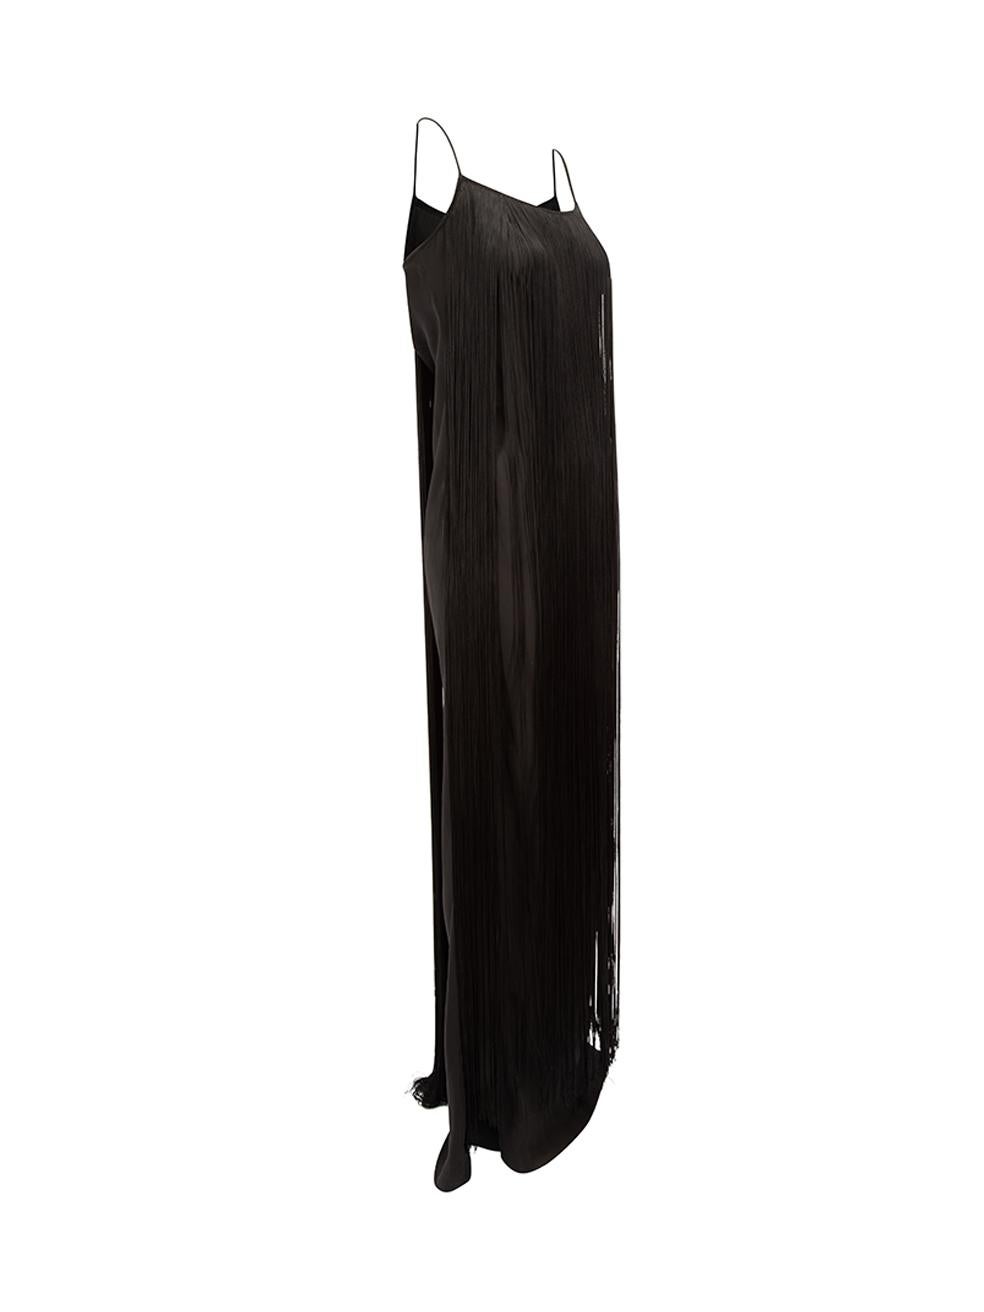 CONDITION is Very good. Hardly any visible wear to dress is evident. There ae a few loose threads on this used Tom Ford designer resale item. 



Details


Black

Silk

Maxi dress

Fringed accent

Round neckline

Side zip closure with hook and